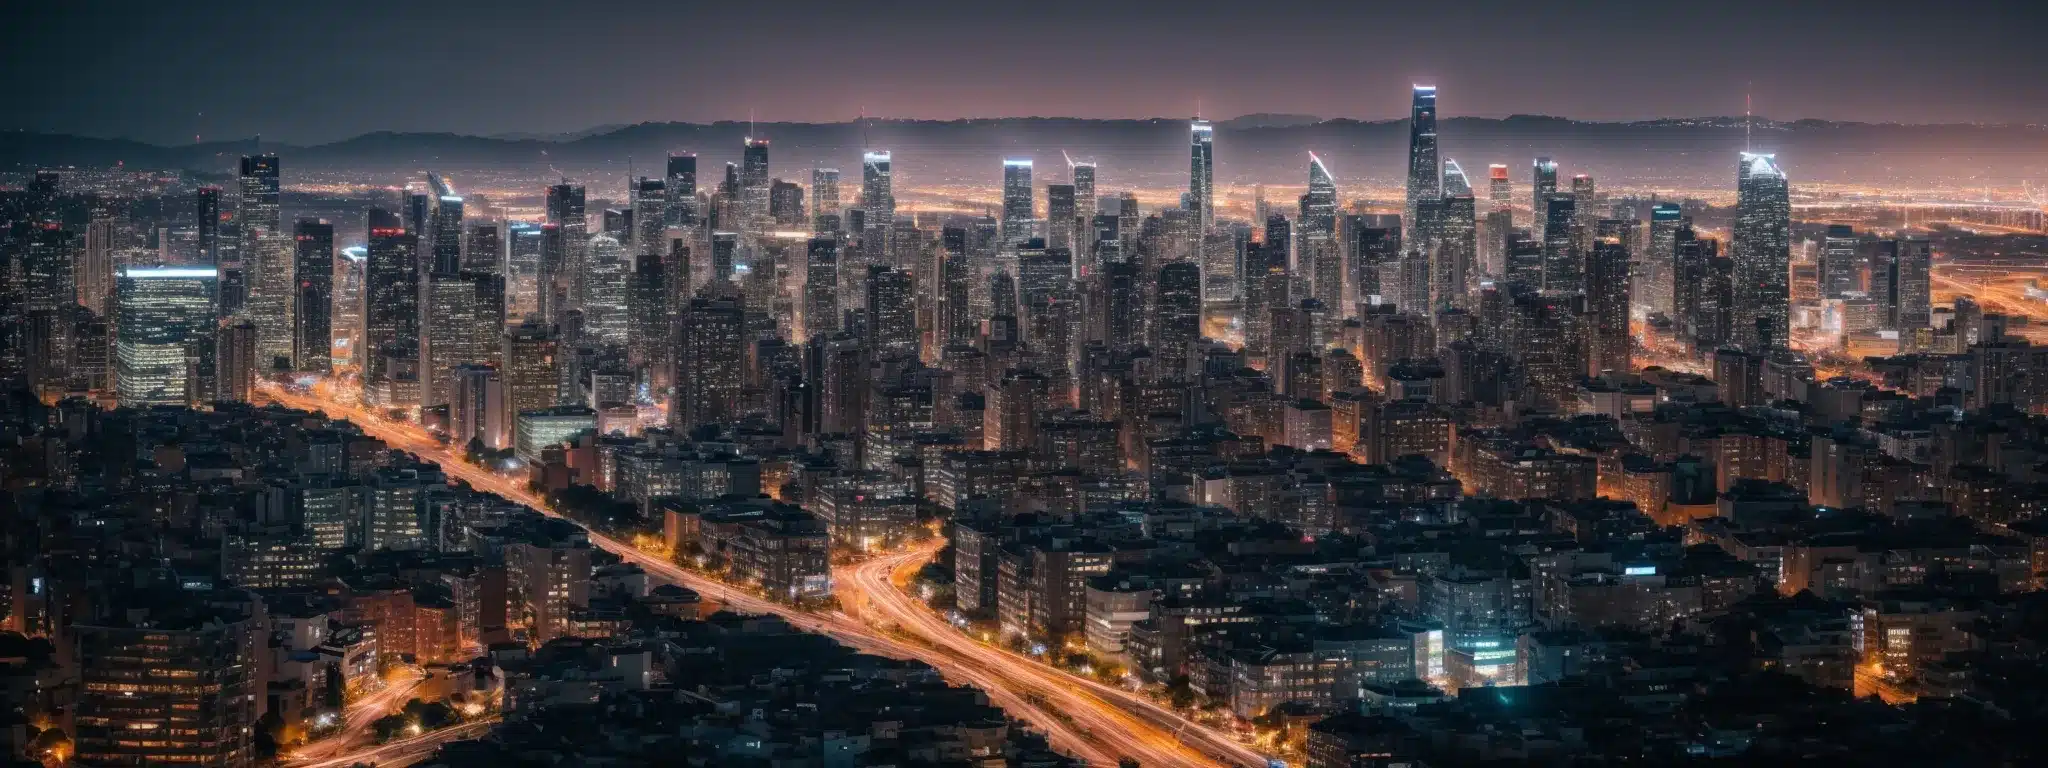 A Panoramic View Of A Modern City Skyline At Dusk, With Glowing Lights Symbolizing The Interconnectedness Of A Dynamic Digital Marketing Ecosystem.